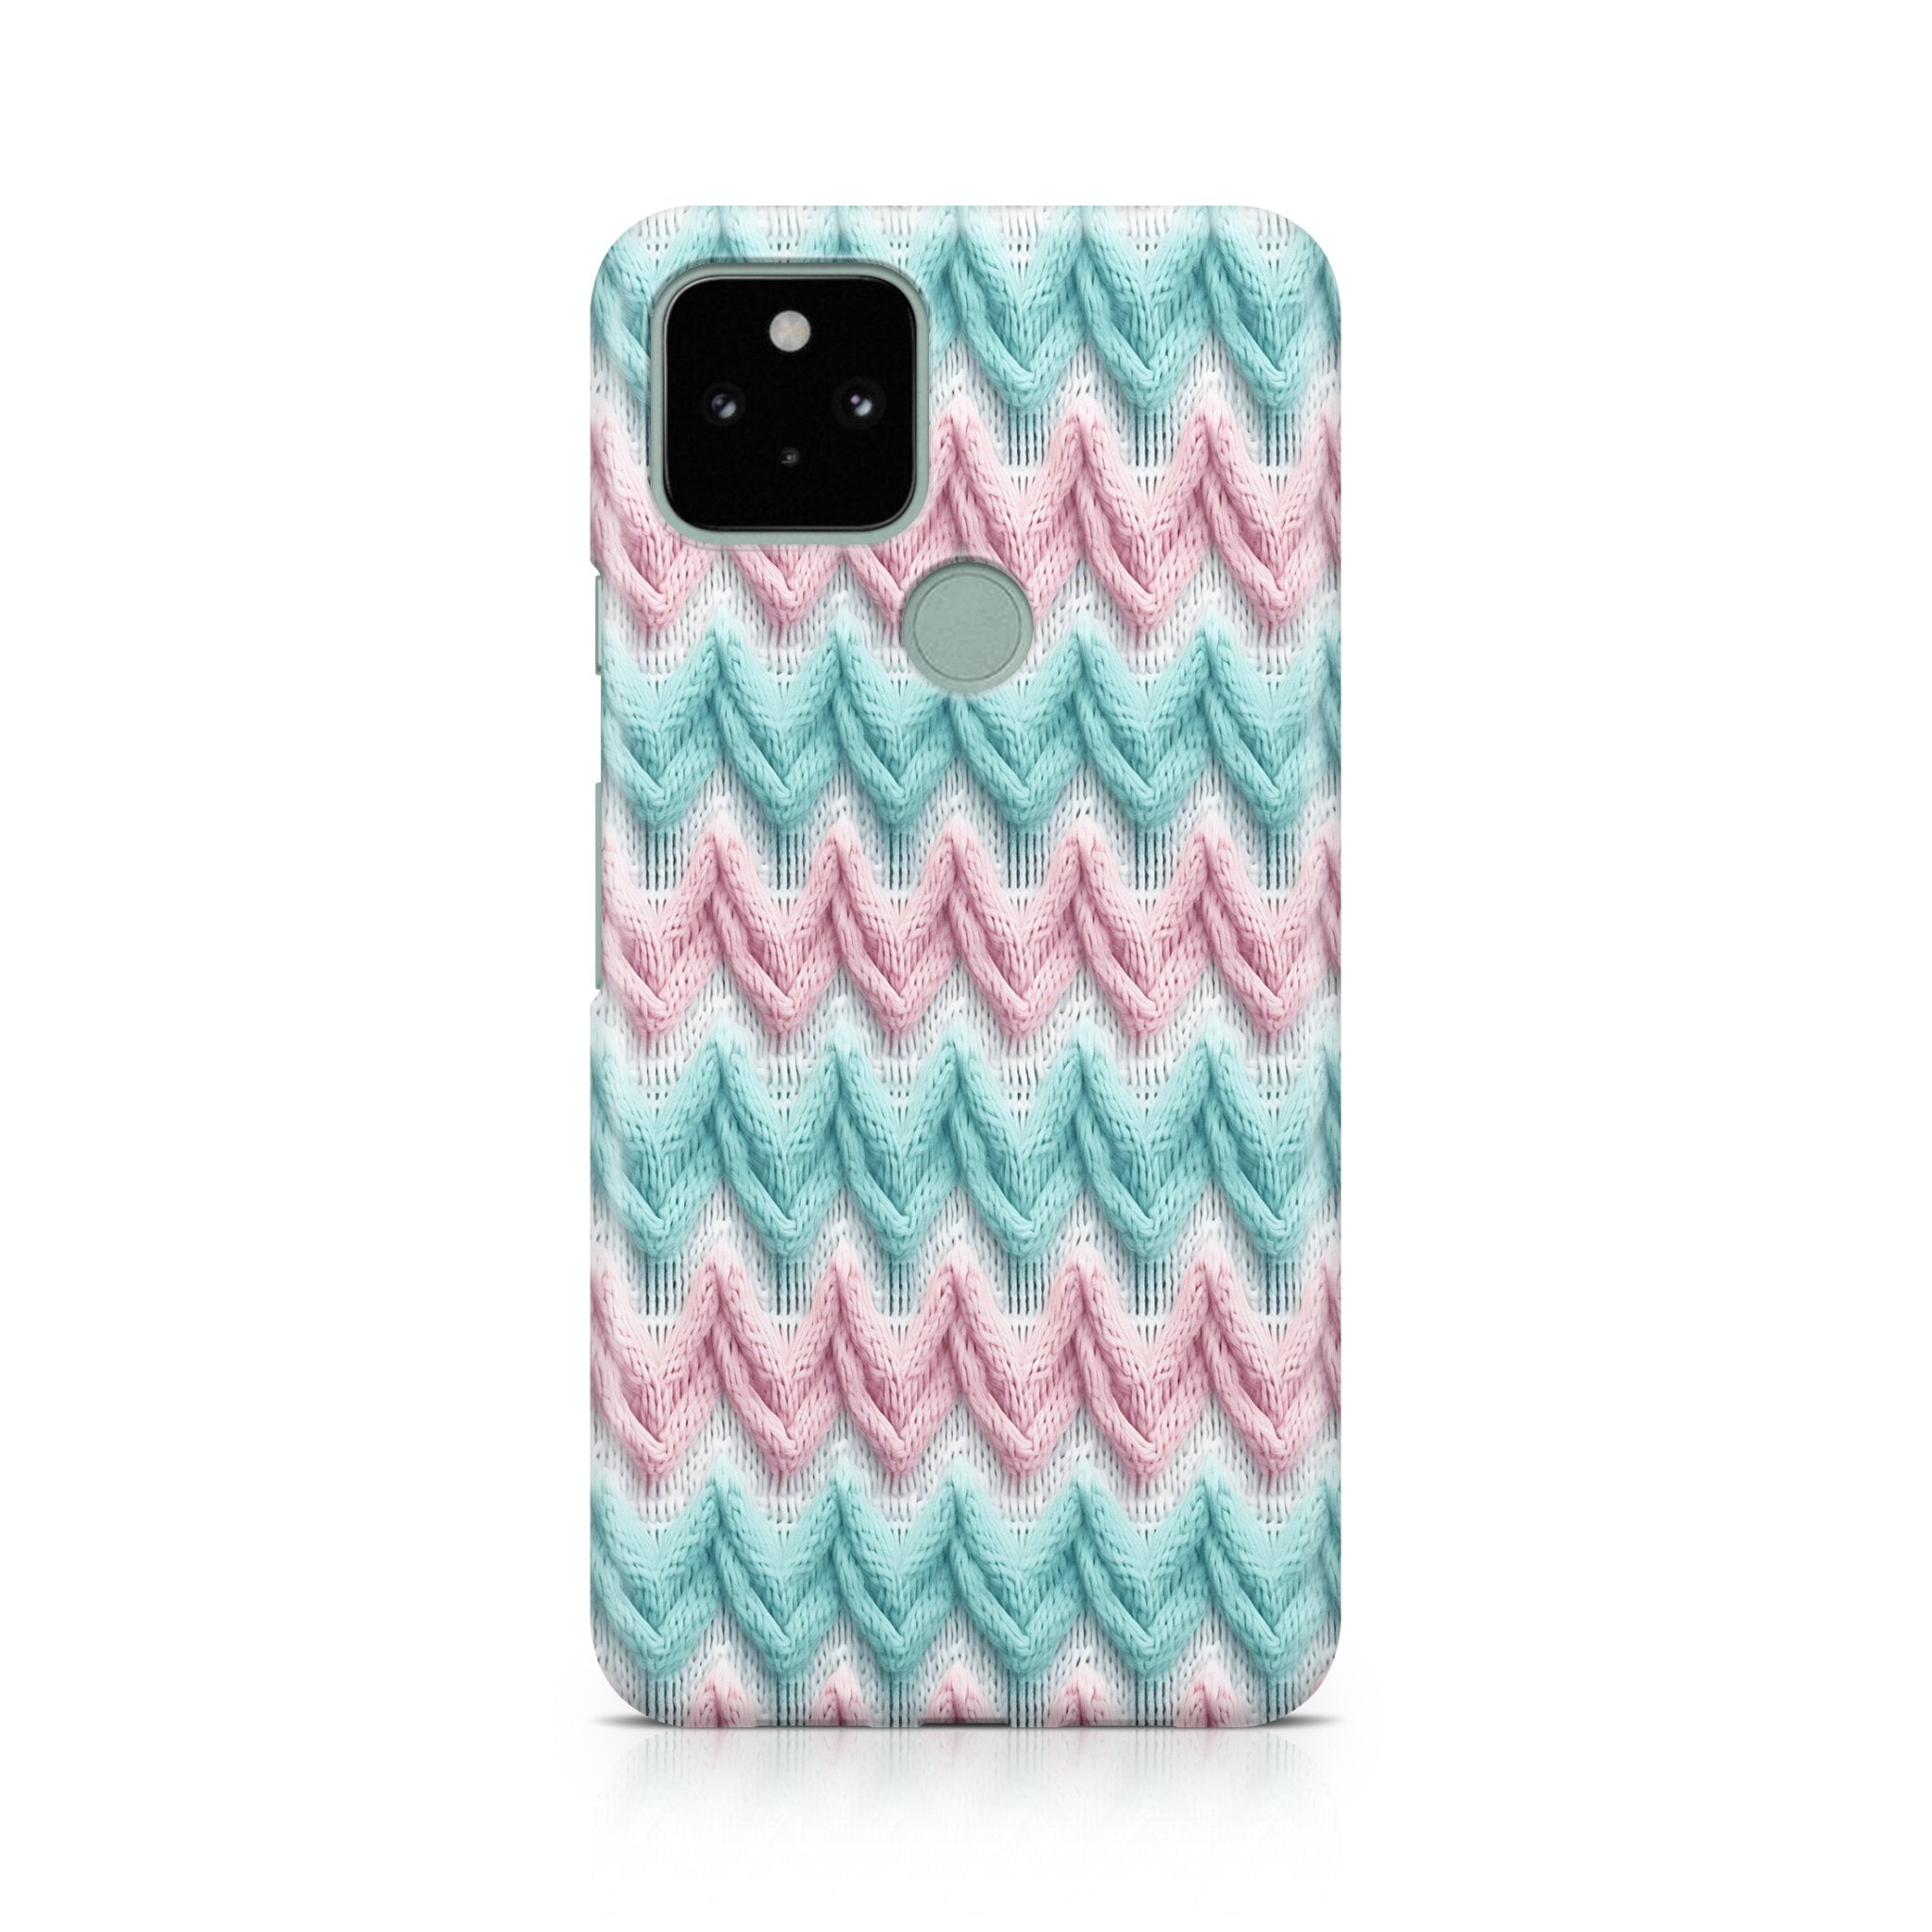 Dreamy Hues - Google phone case designs by CaseSwagger